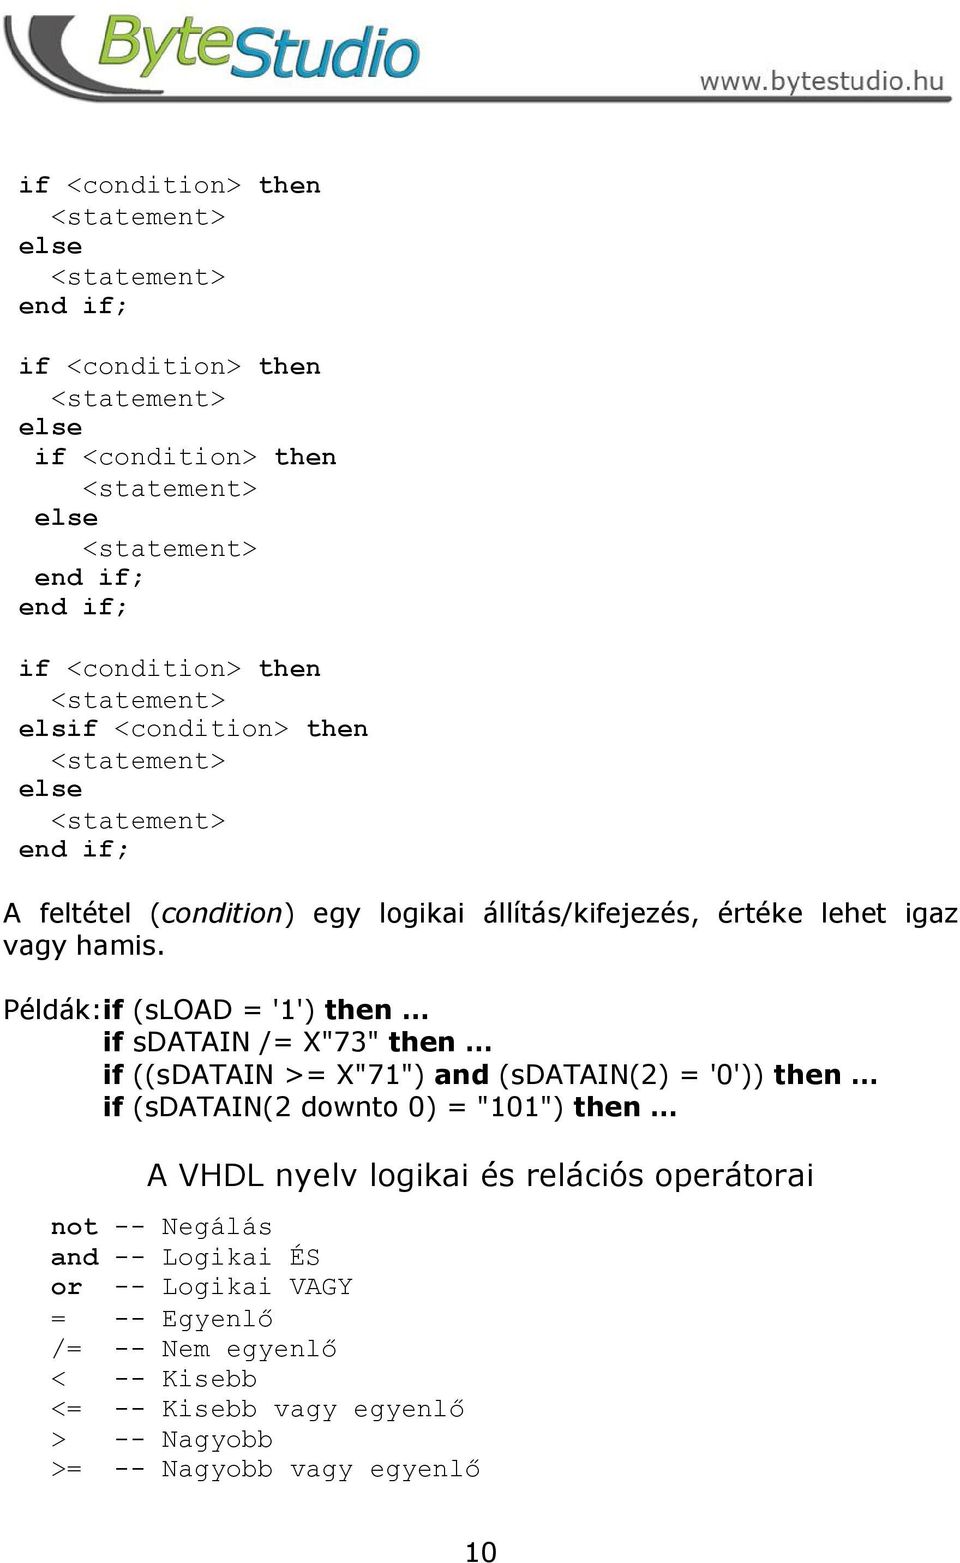 Példák: if (sload = '1') then if sdatain /= X"73" then if ((sdatain >= X"71") and (sdatain(2) = '0')) then if (sdatain(2 downto 0) = "101") then A VHDL nyelv